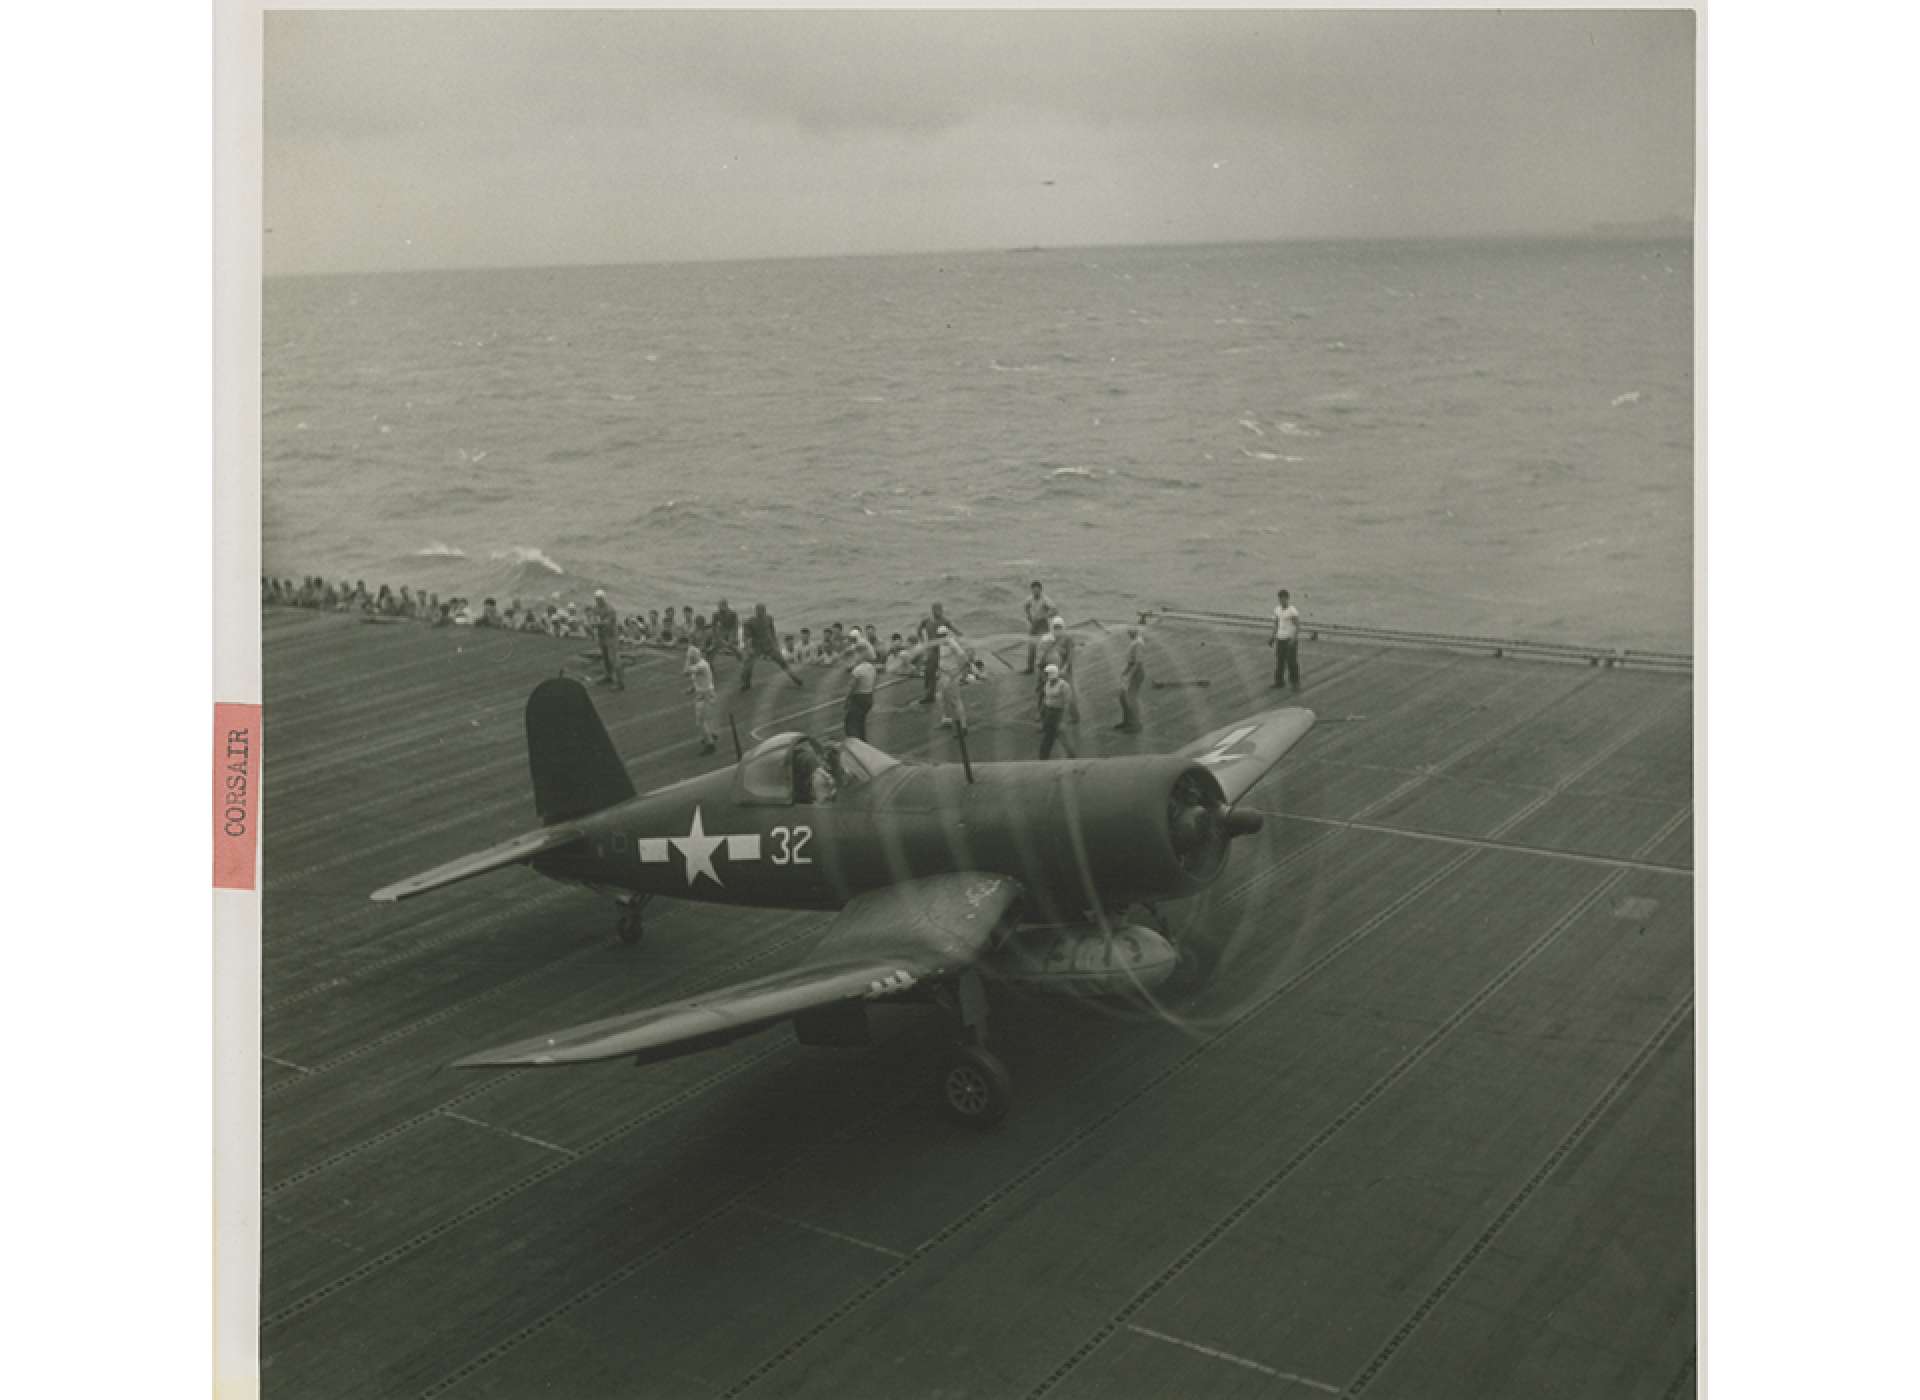 A US Marine Corsair ready for takeoff from an Essex-class carrier on February 27, 1945. Gift In Memory of Charles Ives, 2011.102.452